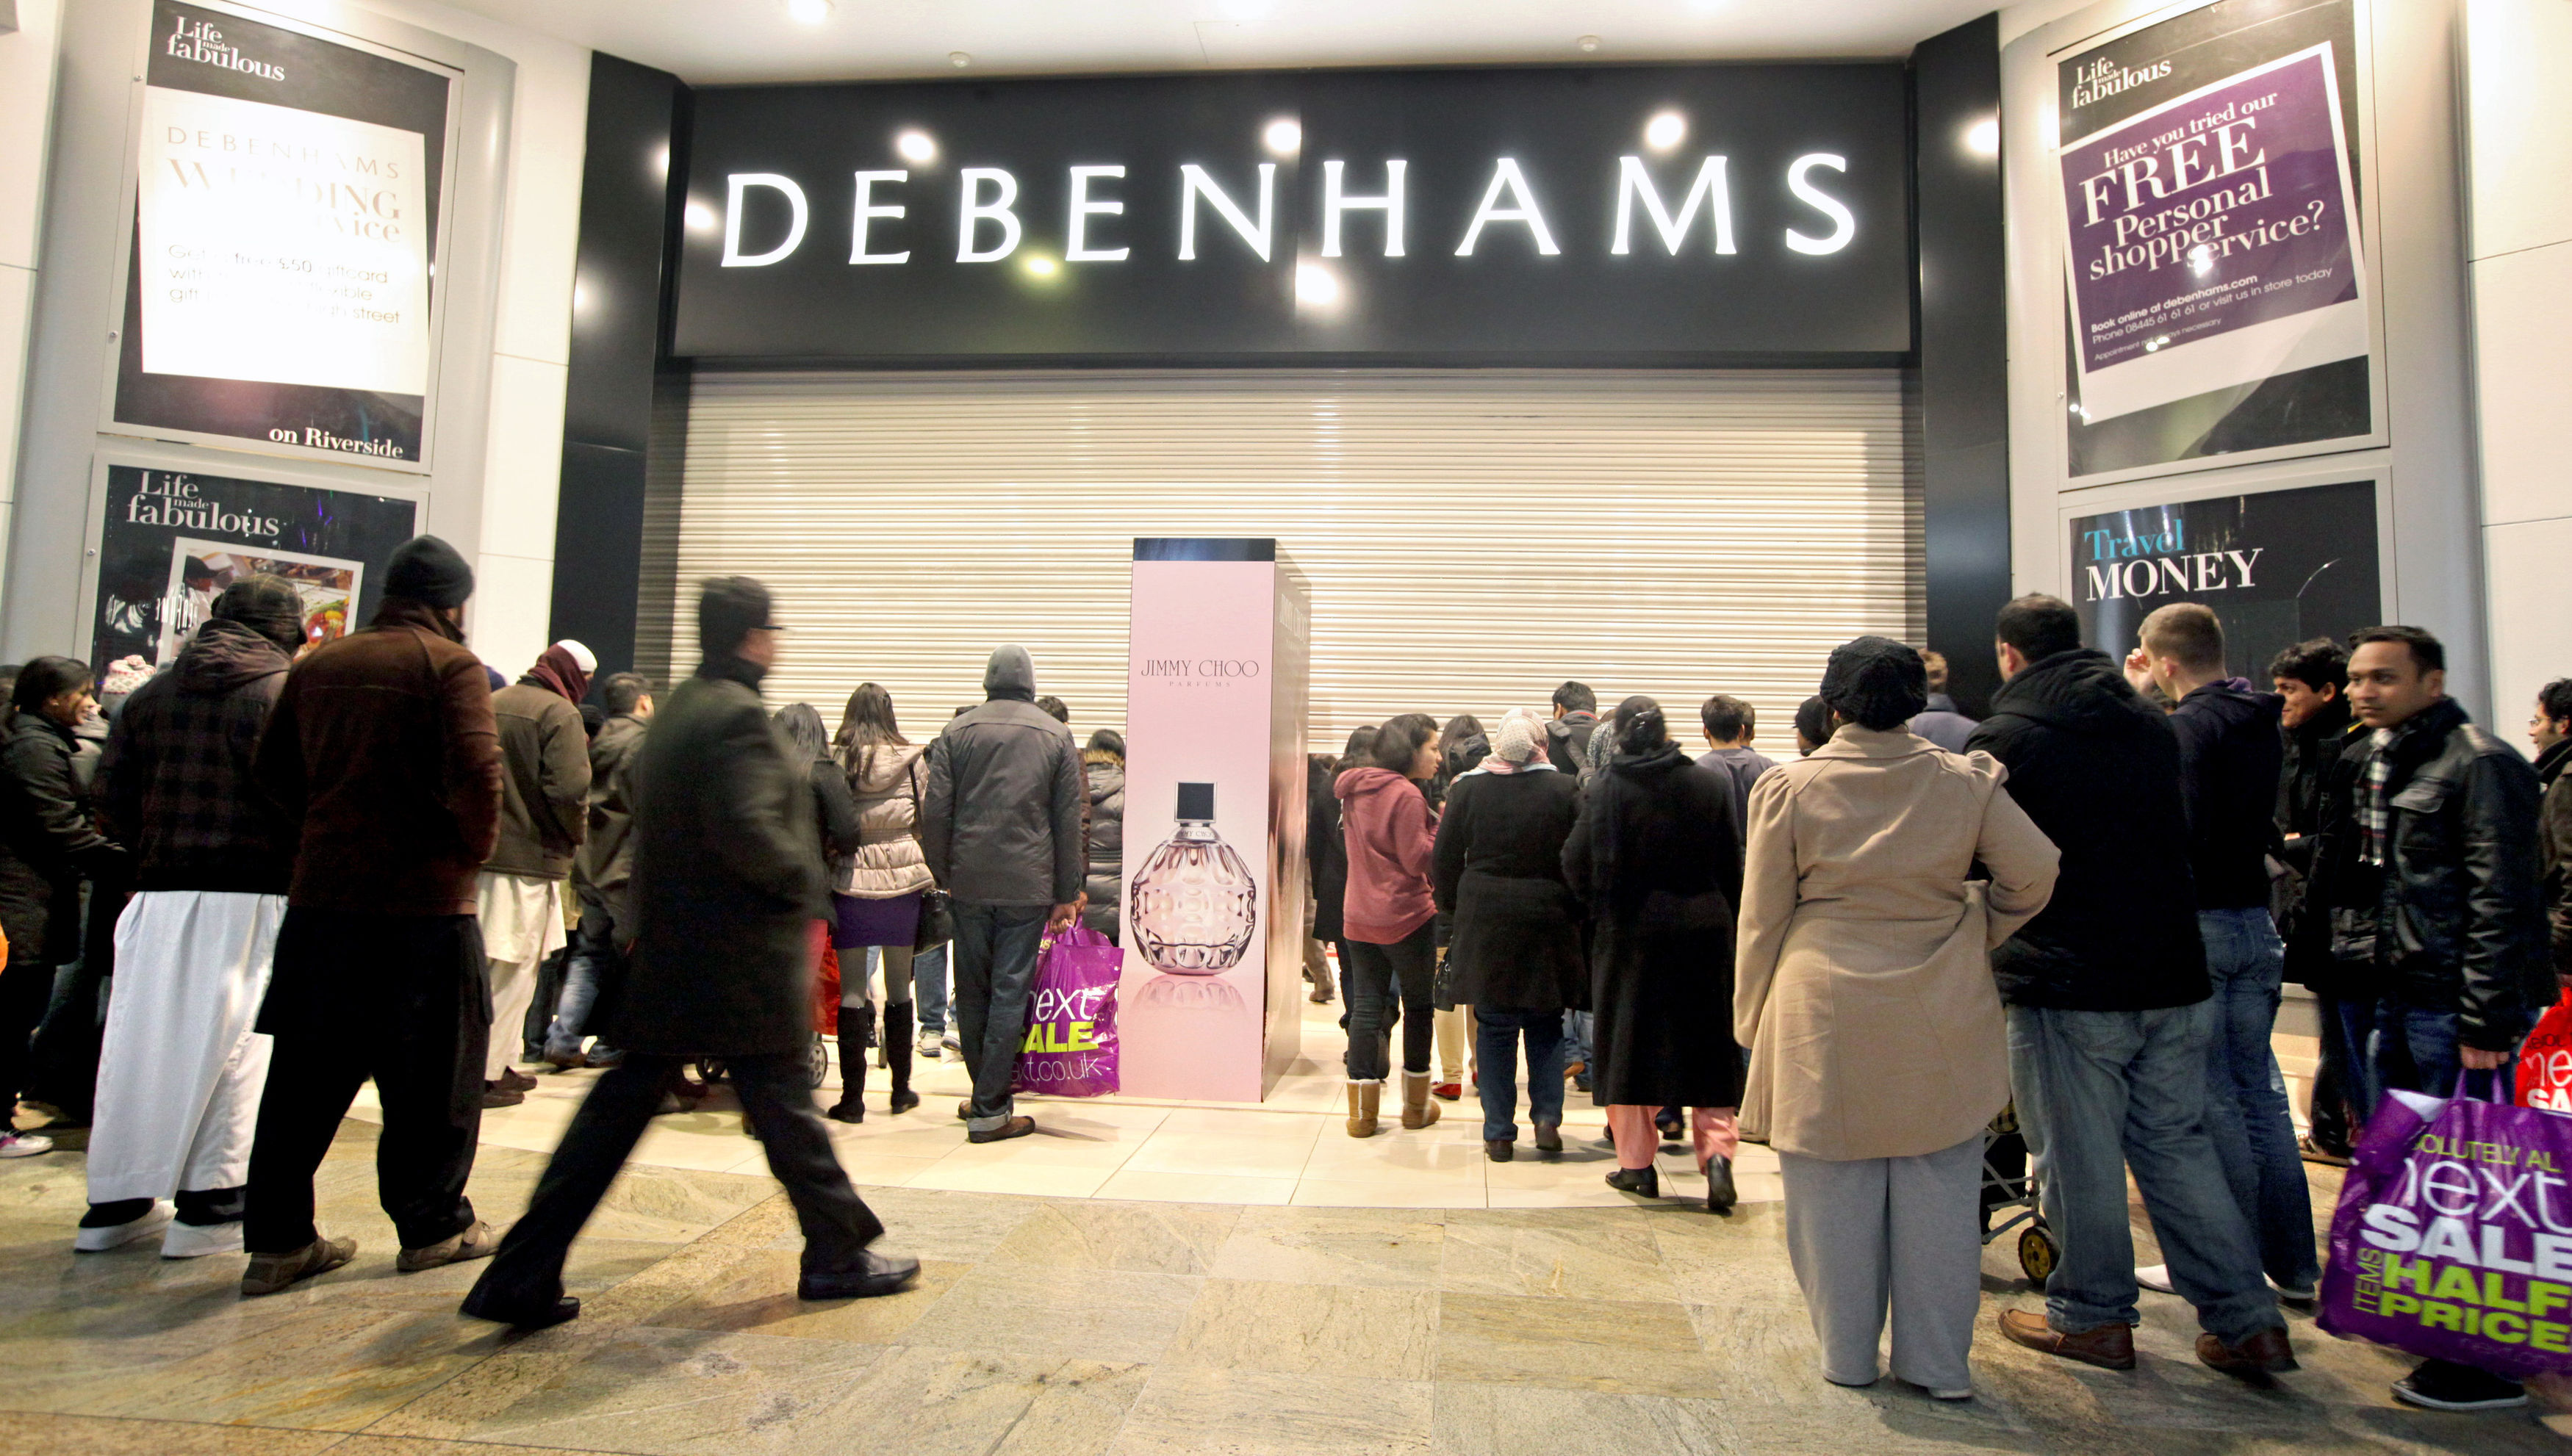 Debenhams shuts down after failing to provide customers with good